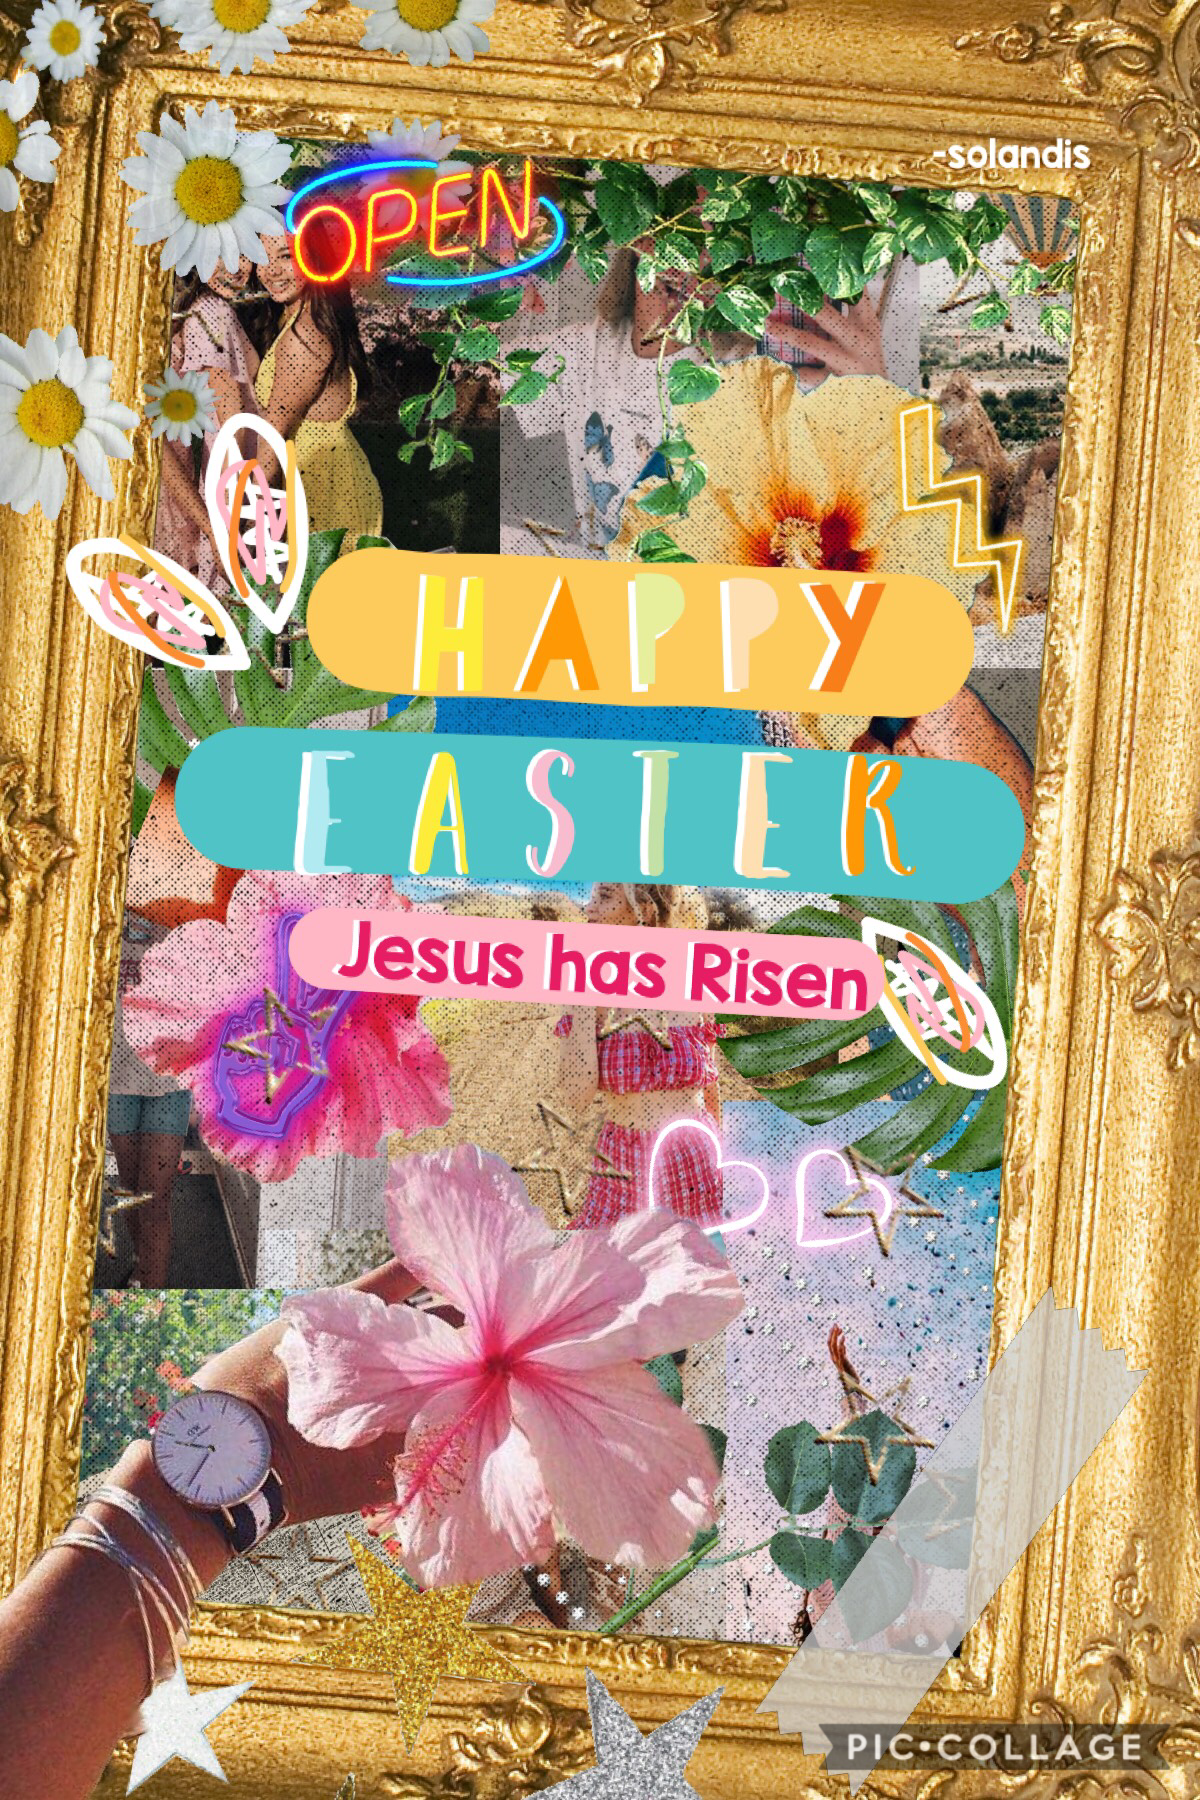 Happy Easter 🌸🍃🌷💕♥️⚡️☀️🌻🌵🥳🌹✨ 4.21.19.